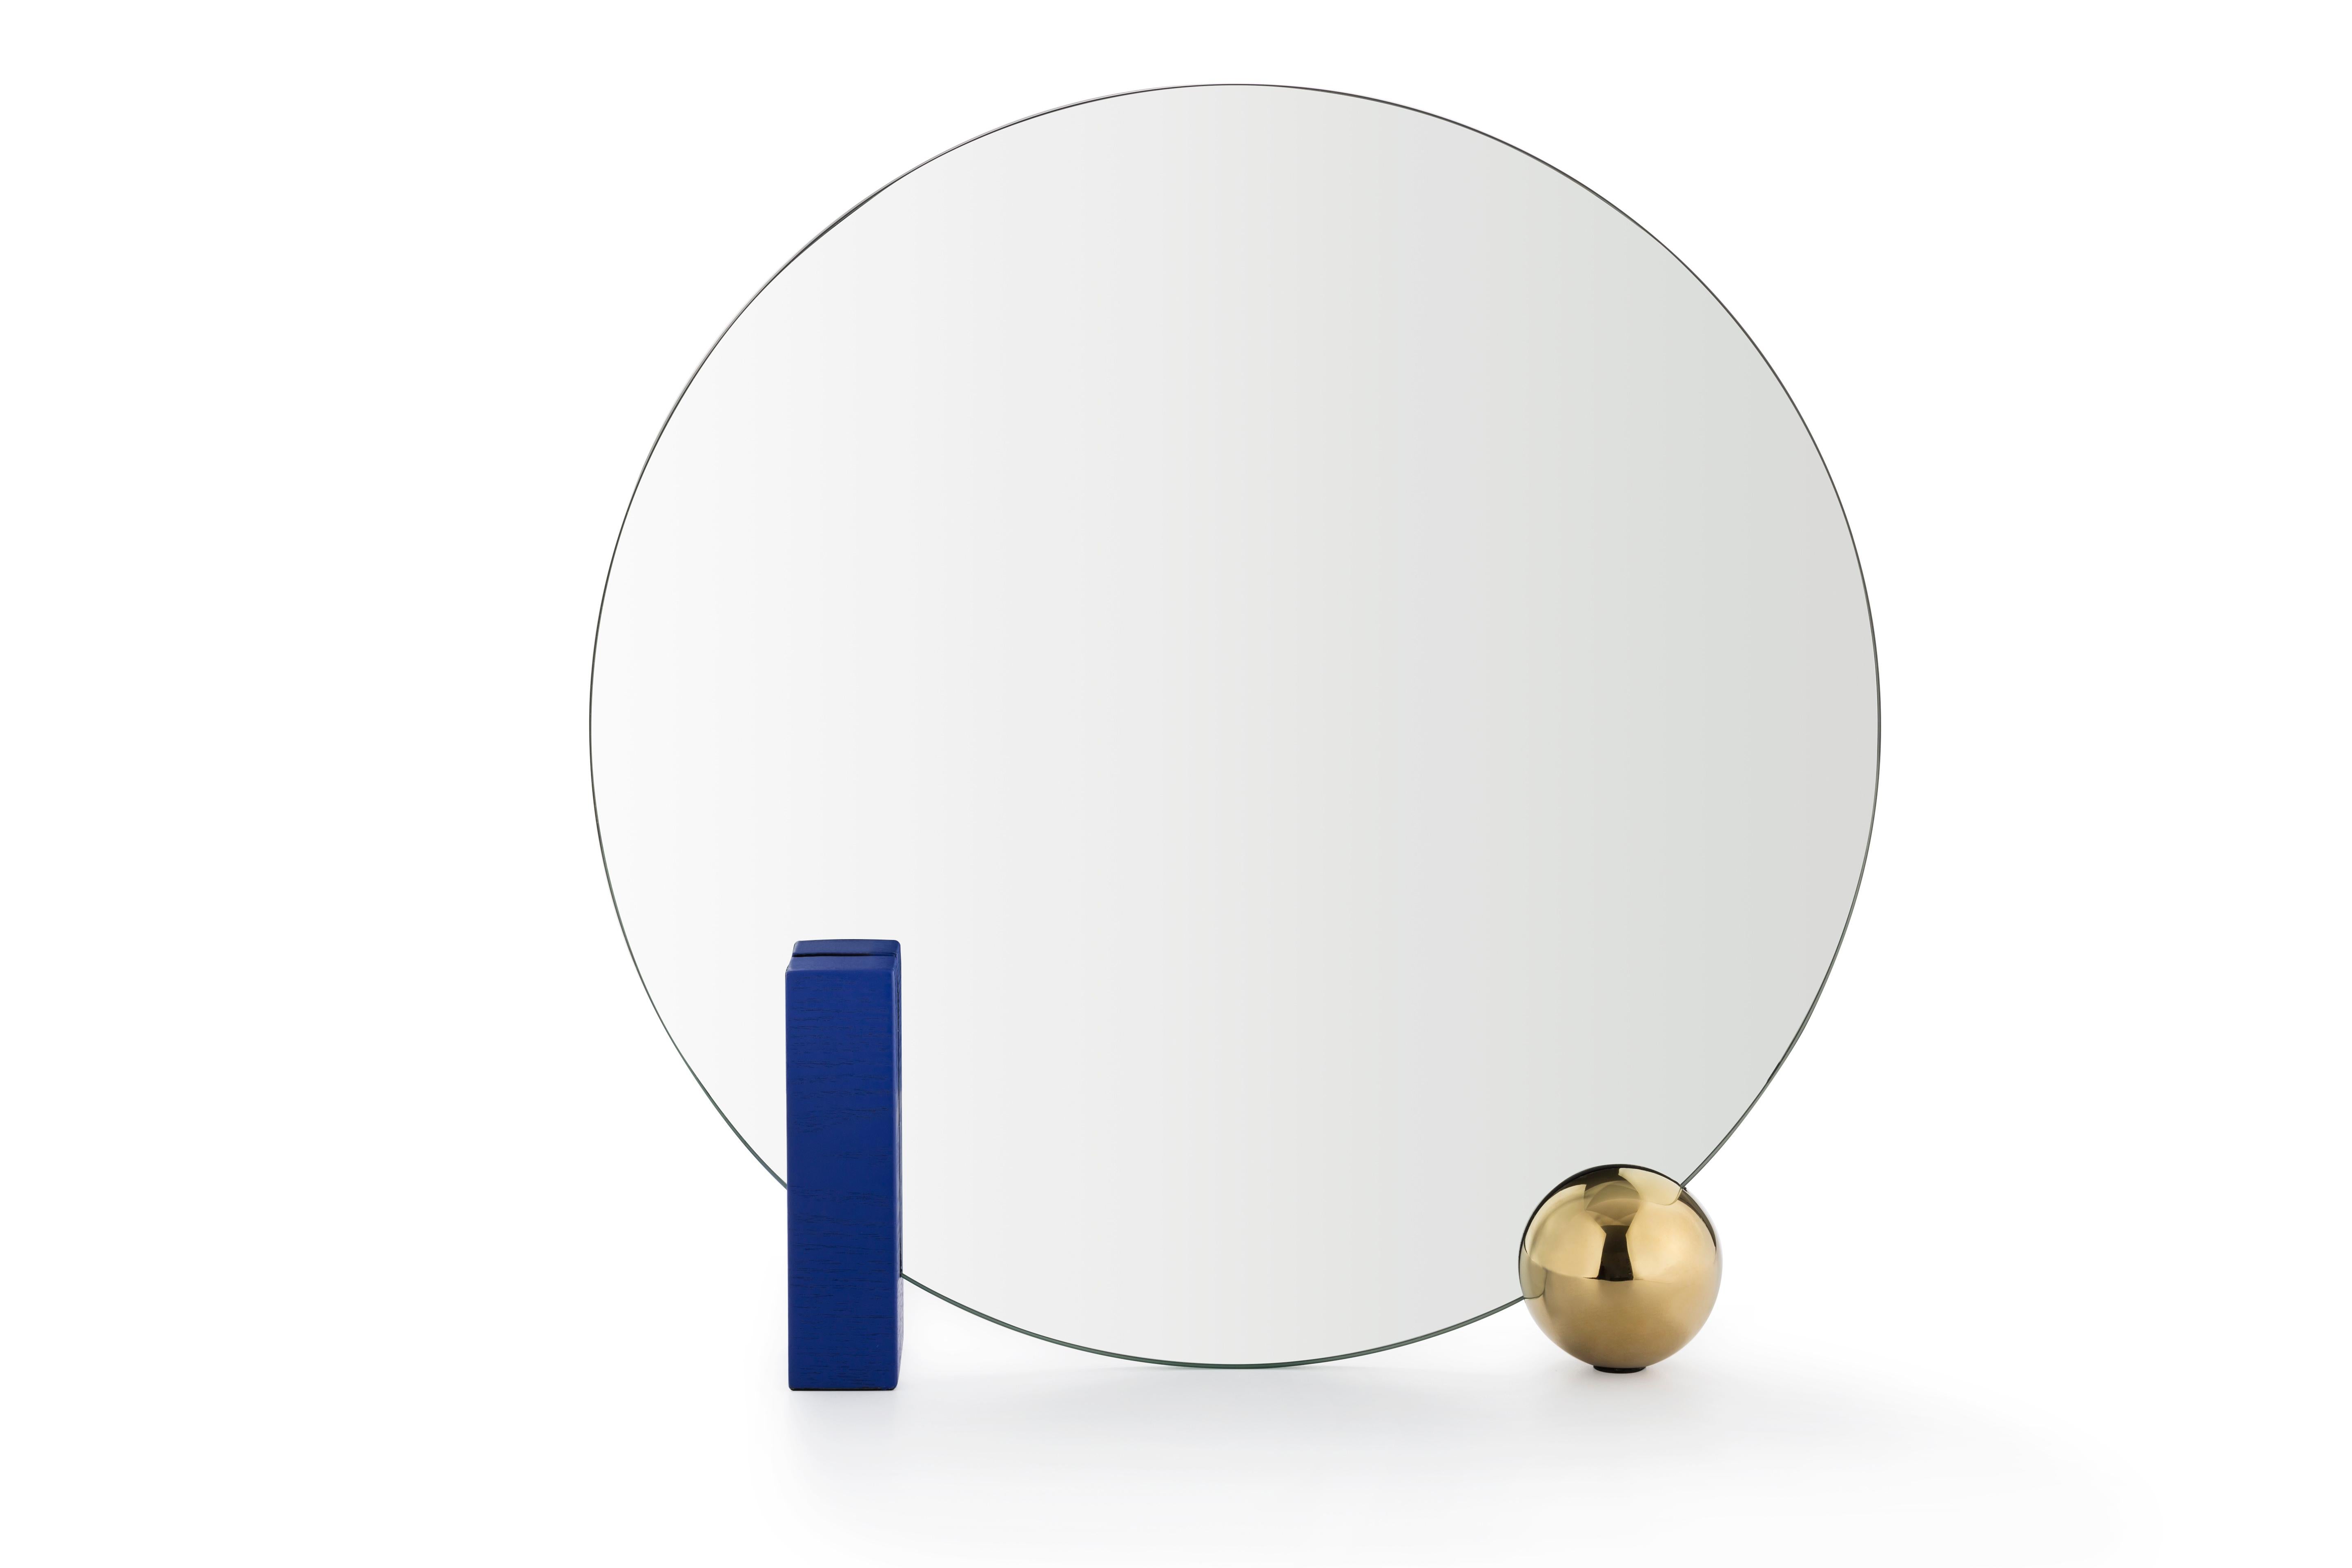 Design by WUU
Table mirror •Measures: W 50, D 9, H 50 cm
Rectangular block in ash veneer painted metal or green marble
Round ball – plated metal coated with glossy gold finish
Back mirror in colored-stained ash veneer, celadon color
Clear